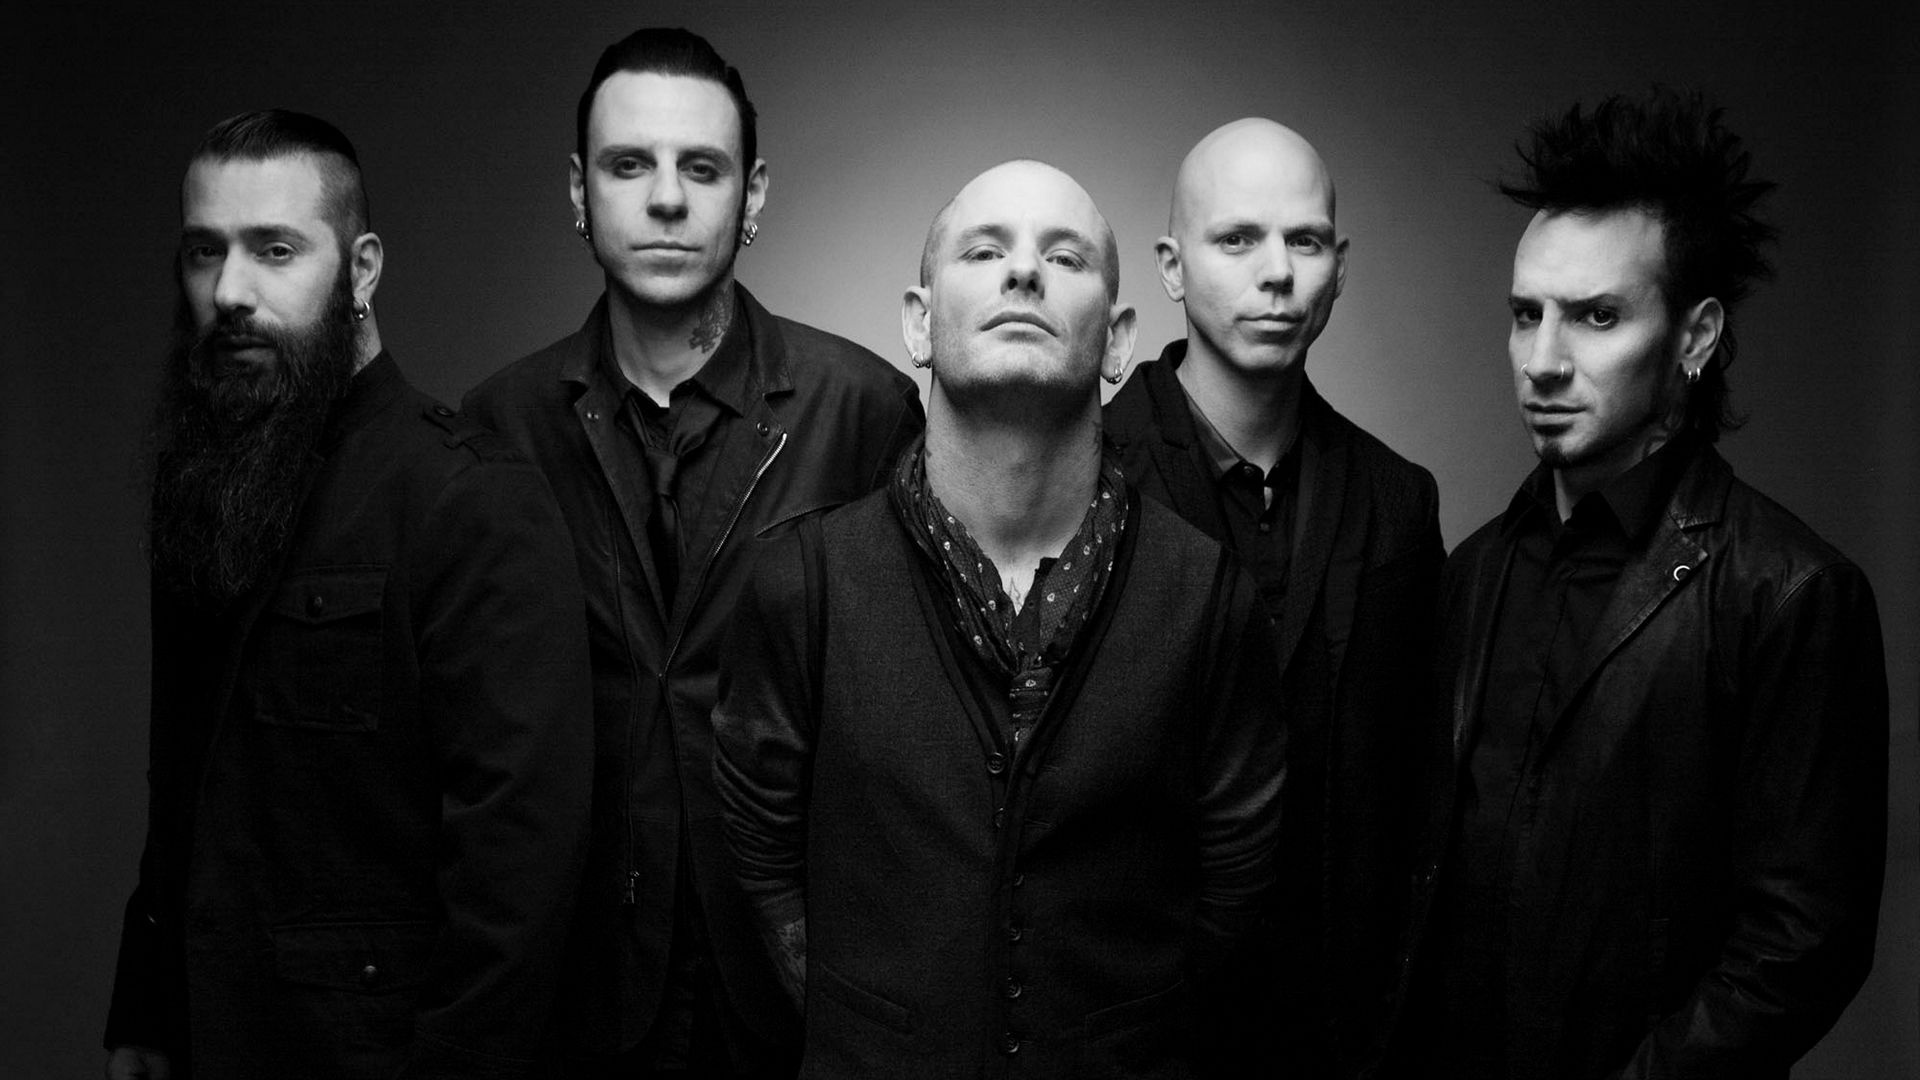 Stone Sour Wallpapers - Top Free Stone Sour Backgrounds 1920x1080